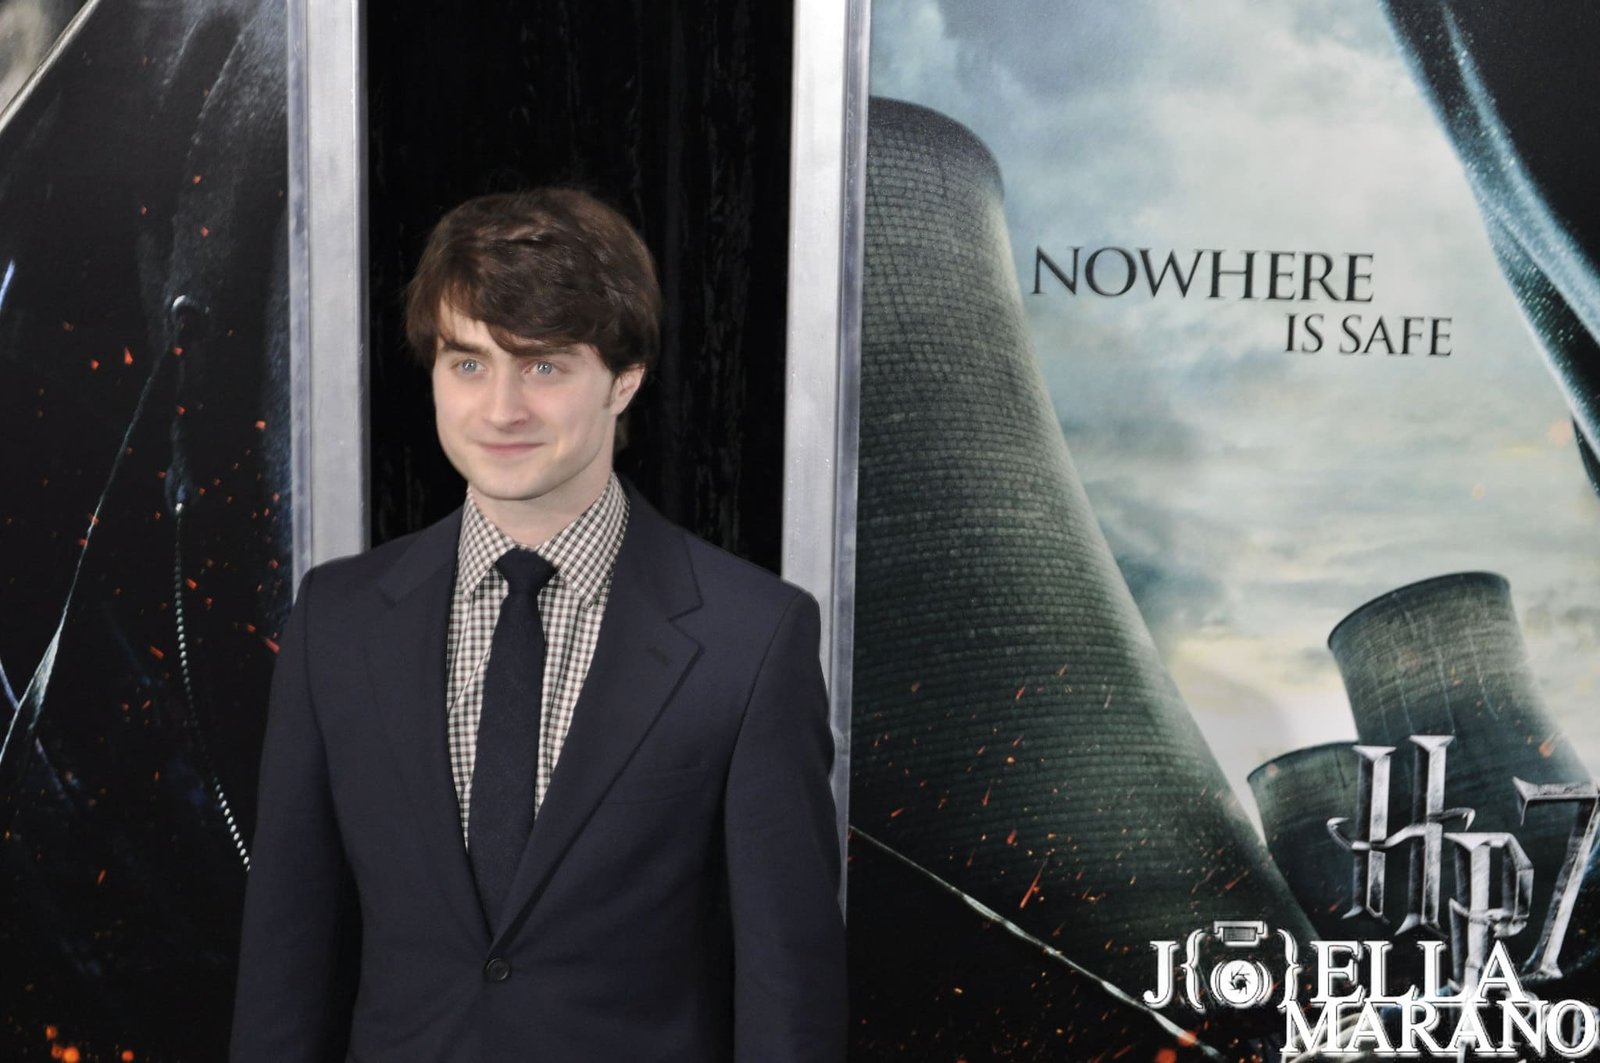 Daniel Radcliffe and What He Did Not Name